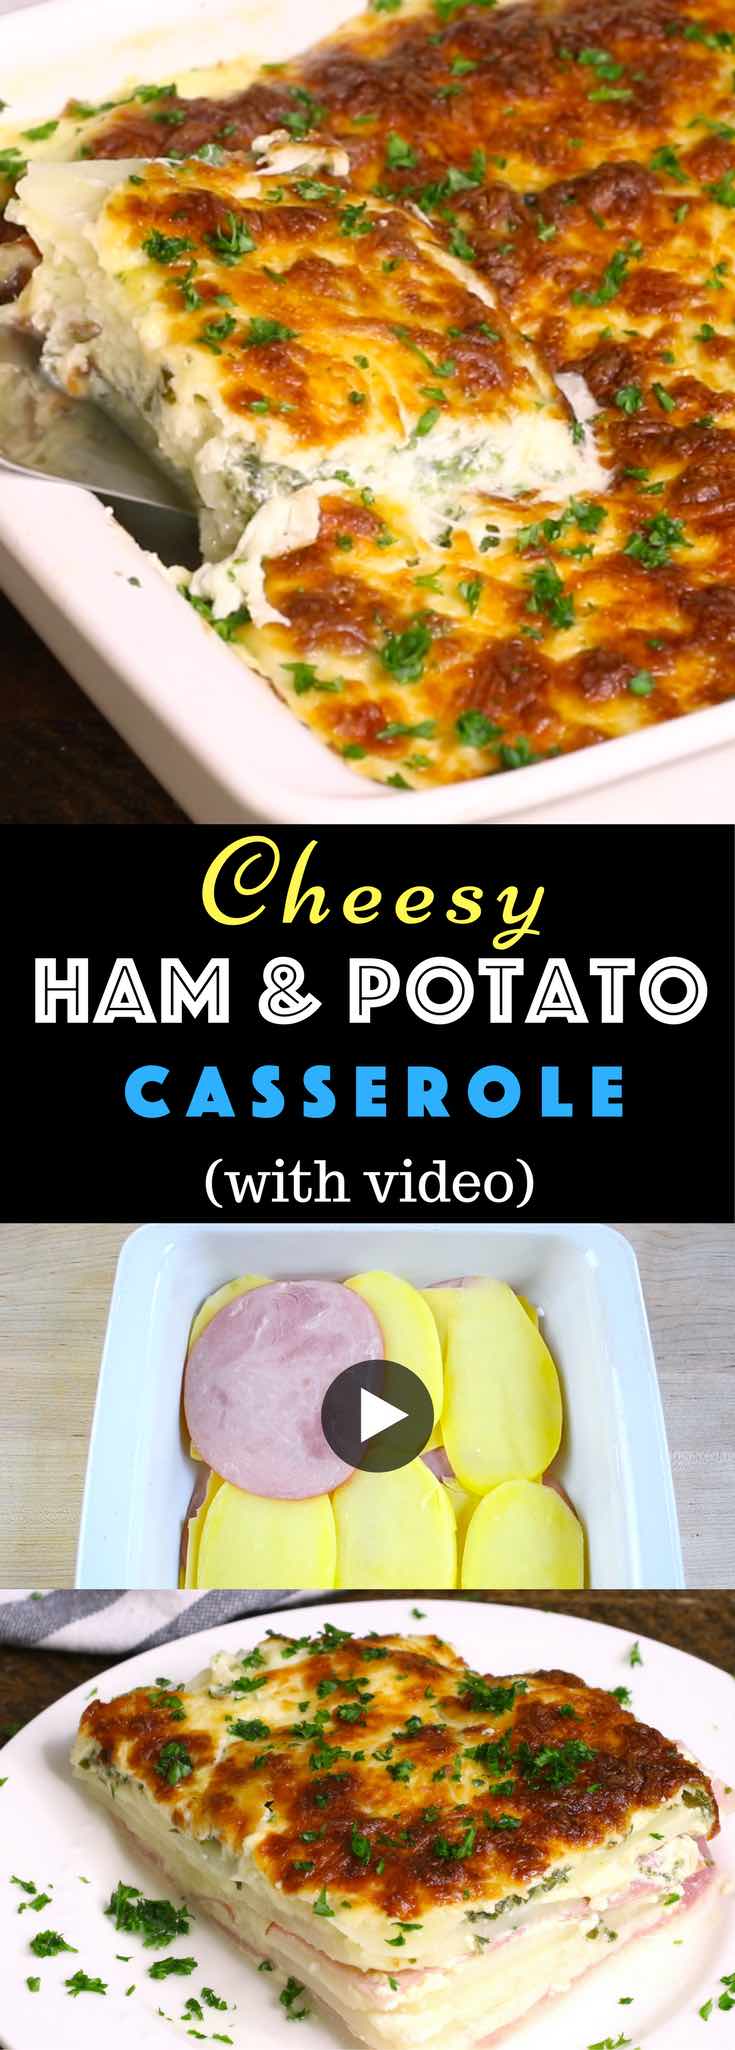 This Layered Ham and Potato Casserole is a delicious main course dish that fills the house with an amazing aroma. It features a golden crust on top as the cheese browns in the oven. Underneath there are layers of ham, potatoes and swiss cheese with eggs, milk and parsley for gastronomic perfection. Easy Dinner. Video recipe. | Tipbuzz.com